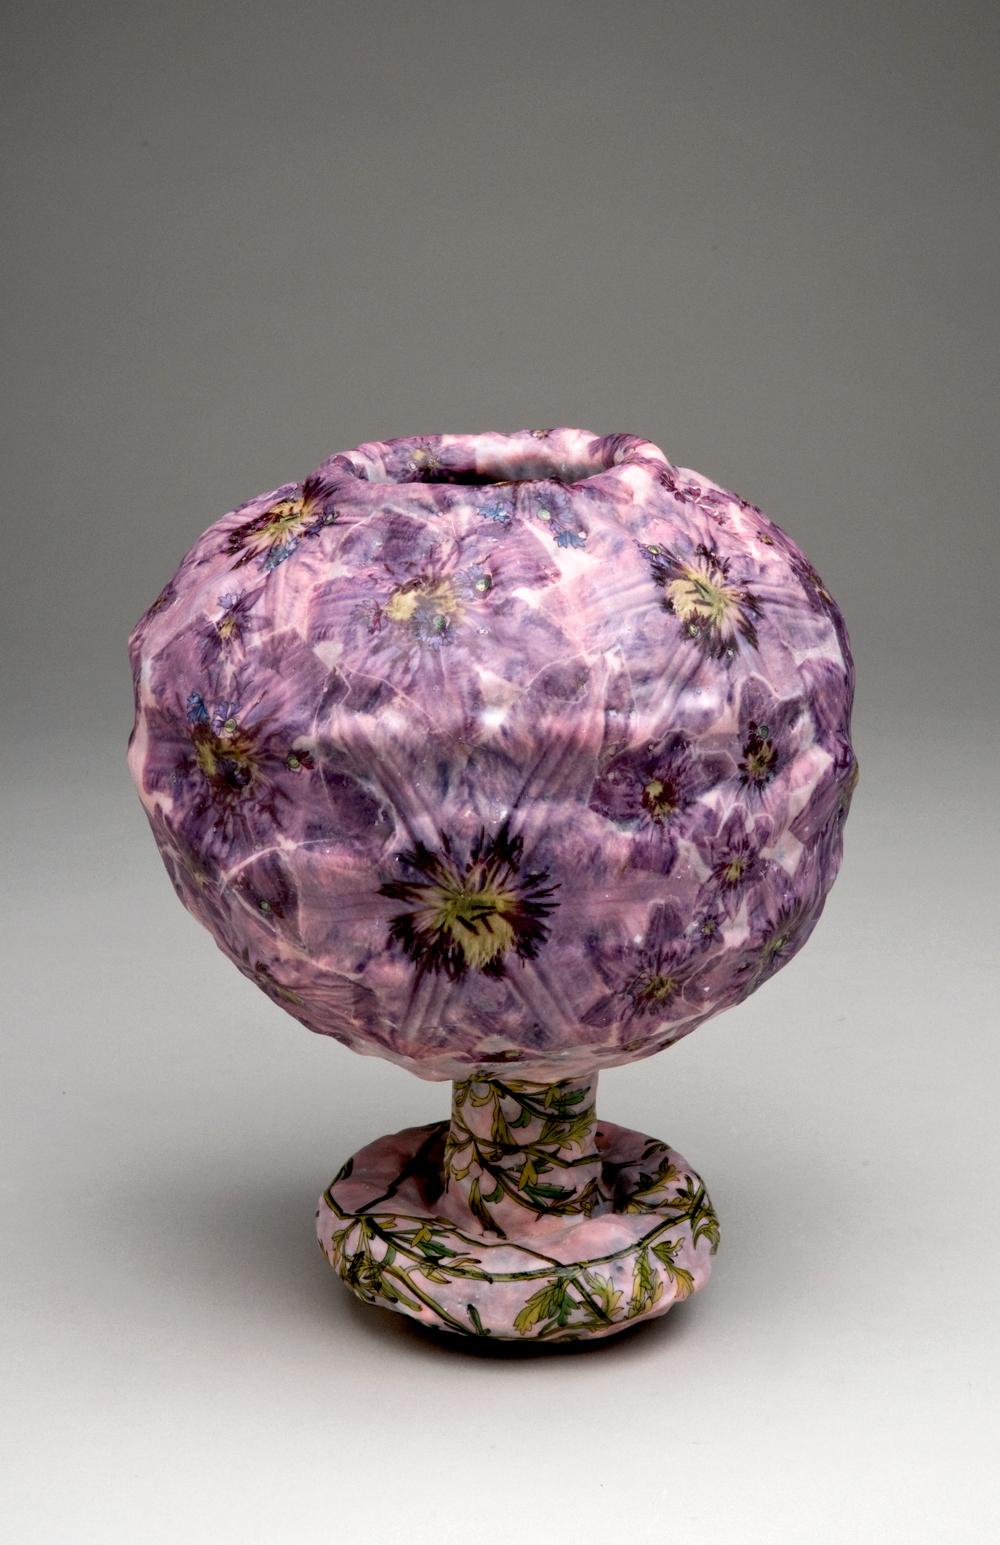 Small Vase Sculpture with Purple Clematis